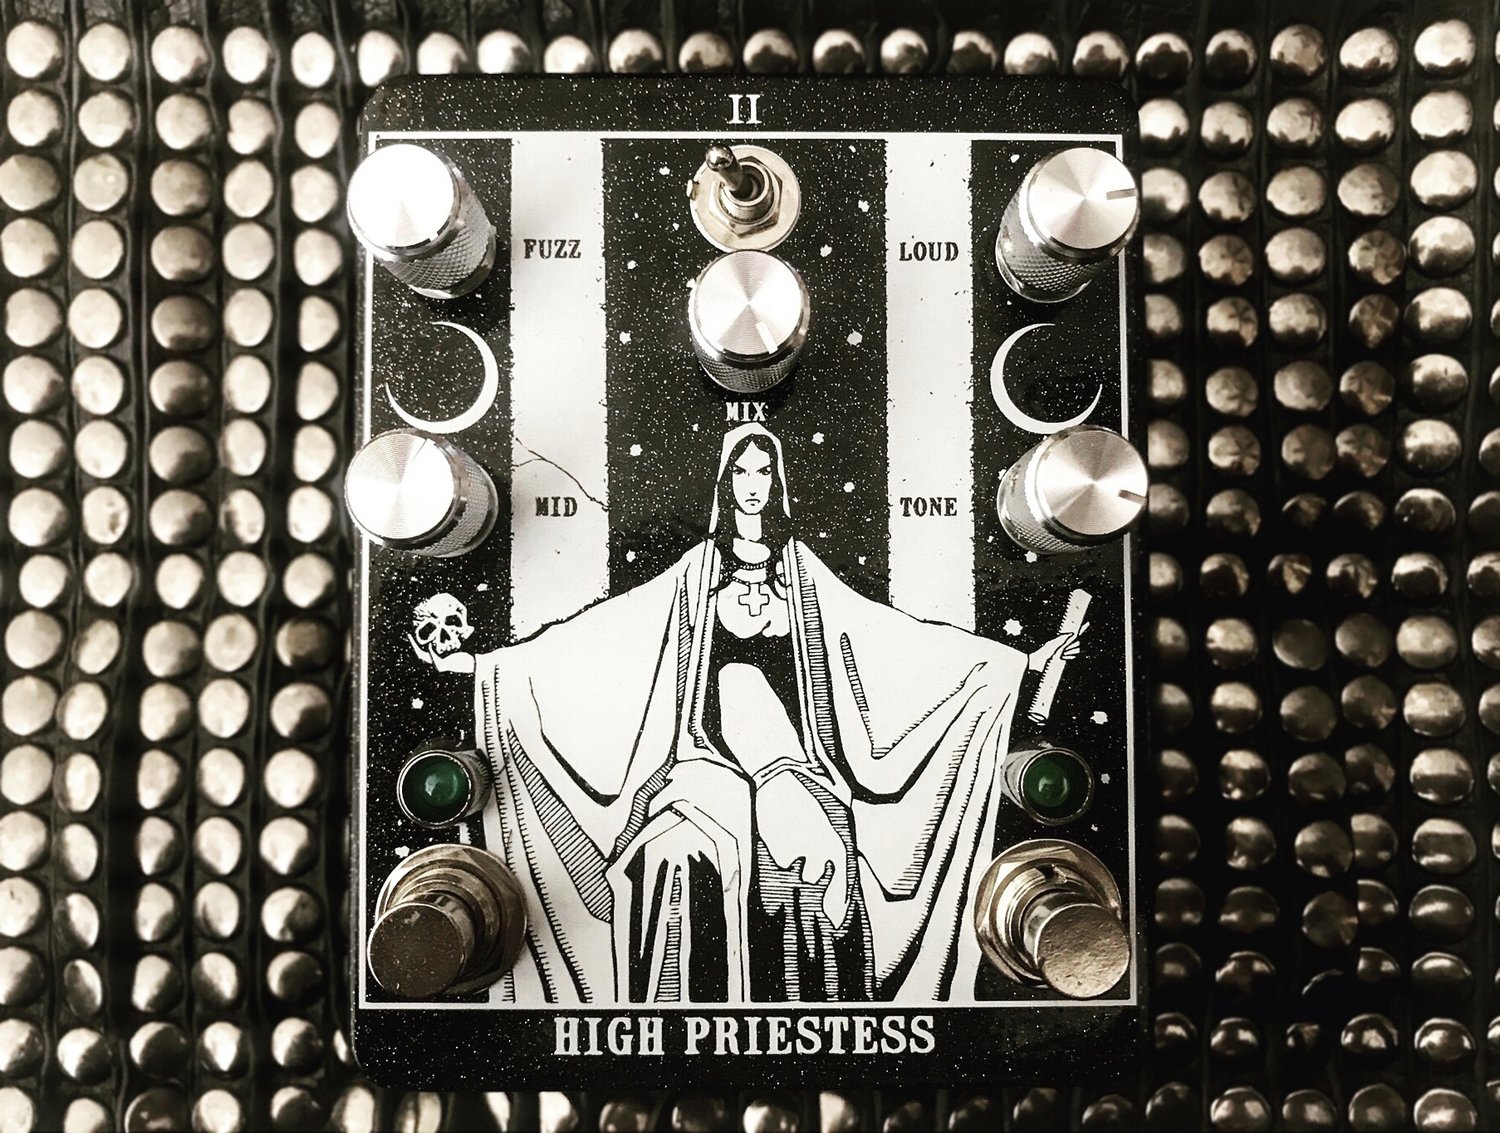 High Priestess Fuzz by Gremlin Noise Machines